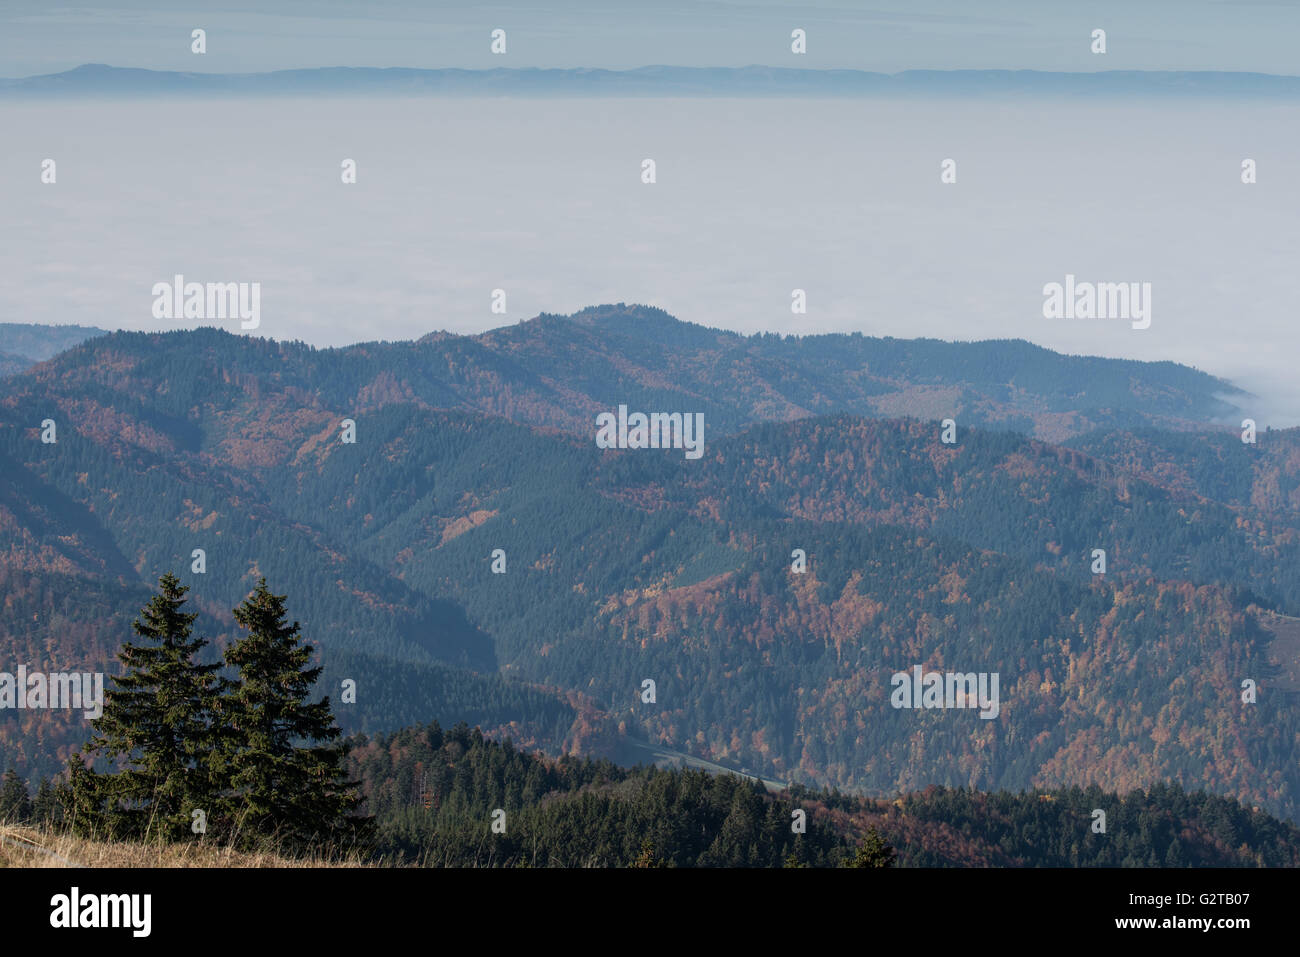 27.10.2015, Schoenau im Schwarzwald, Baden-Wuerttemberg, Germany - View from Belchen towards the Swiss Alps. 00K151029D475CAROEX.JPG - NOT for SALE in G E R M A N Y, A U S T R I A, S W I T Z E R L A N D [MODEL RELEASE: NOT APPLICABLE, PROPERTY RELEASE: NO, (c) caro photo agency / Kaiser, http://www.caro-images.com, info@carofoto.pl - Any use of this picture is subject to royalty!] Stock Photo